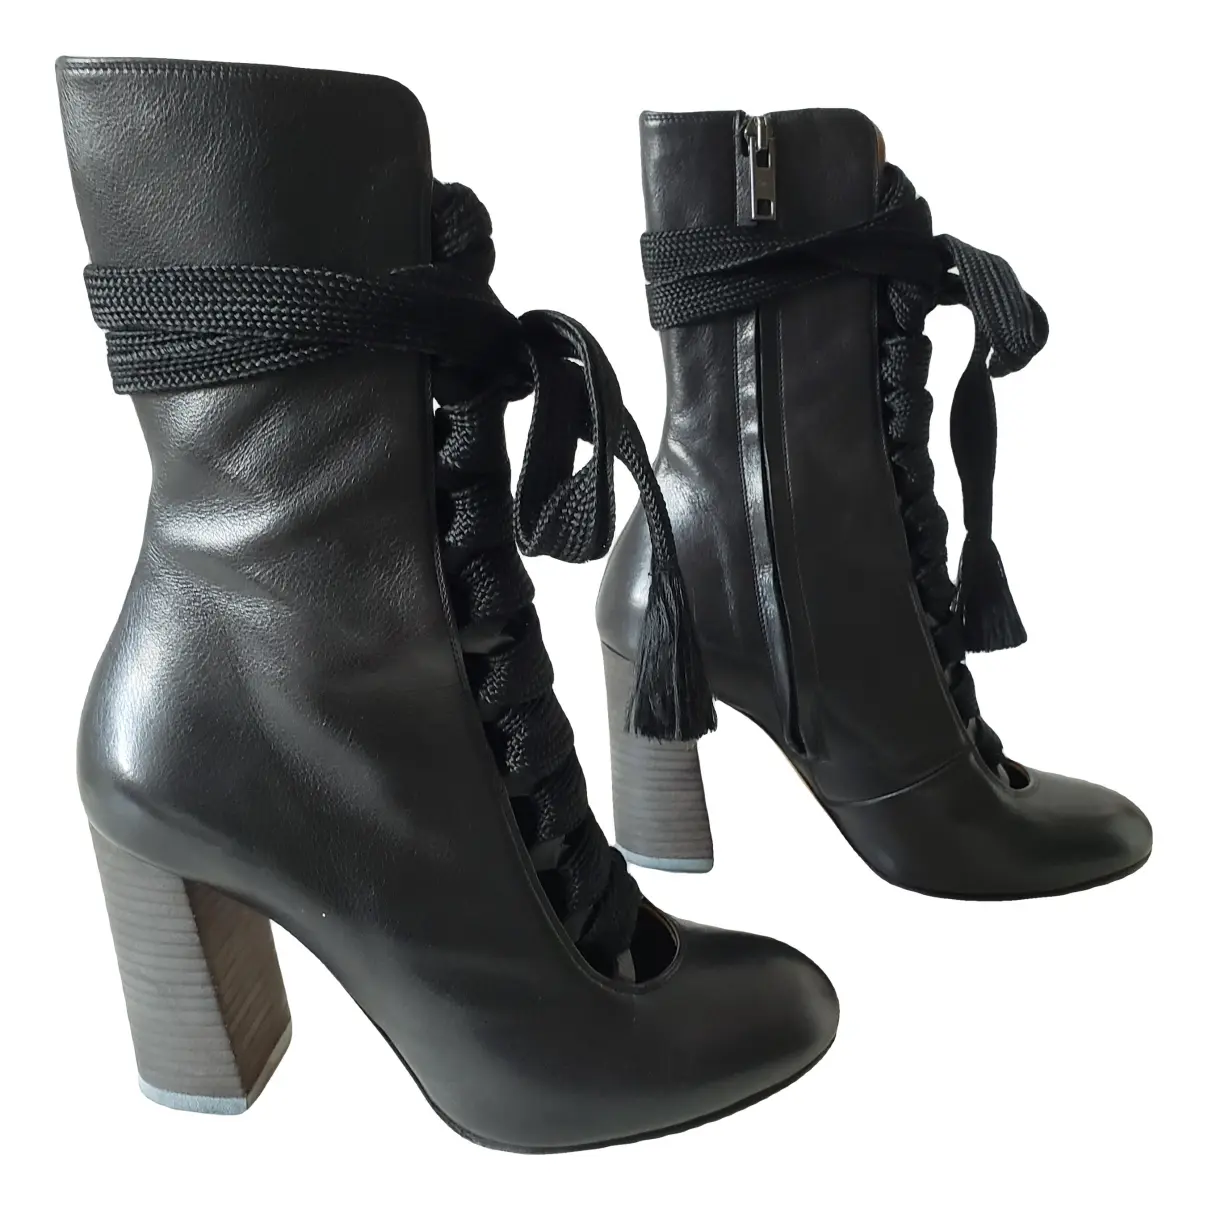 Harper leather boots